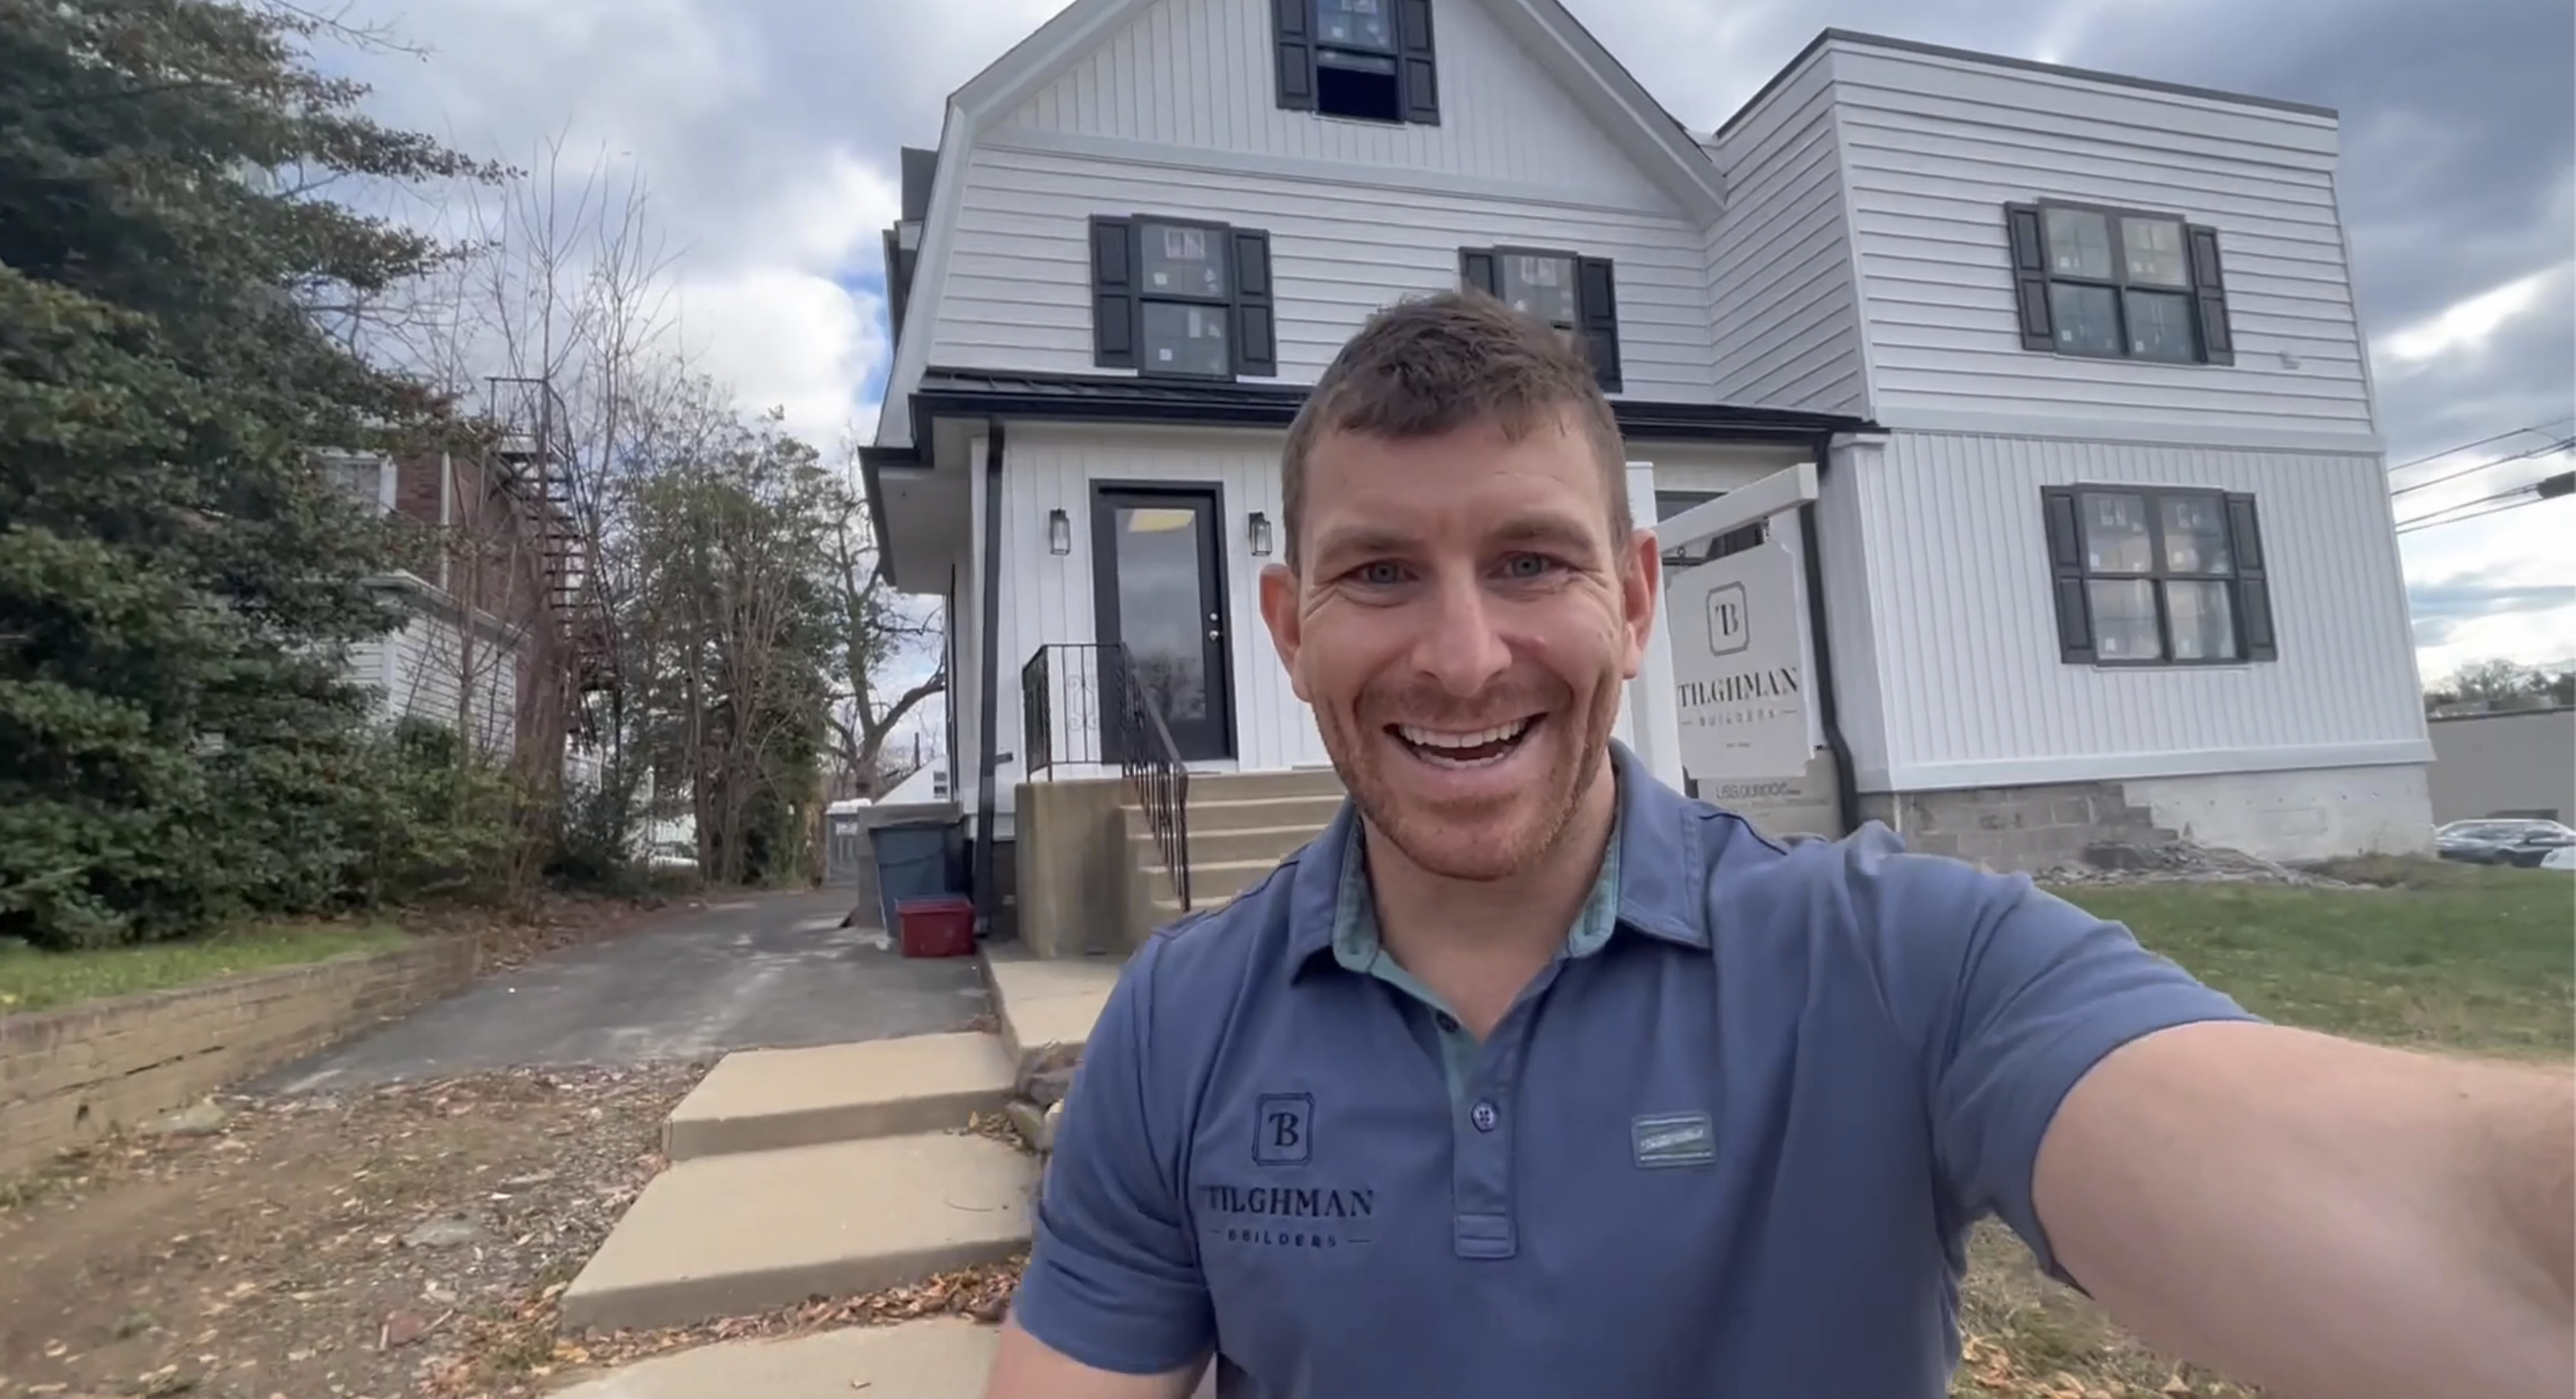 Vlog: Our Office Renovation Part 6 - Exterior Done, Drywall to Go